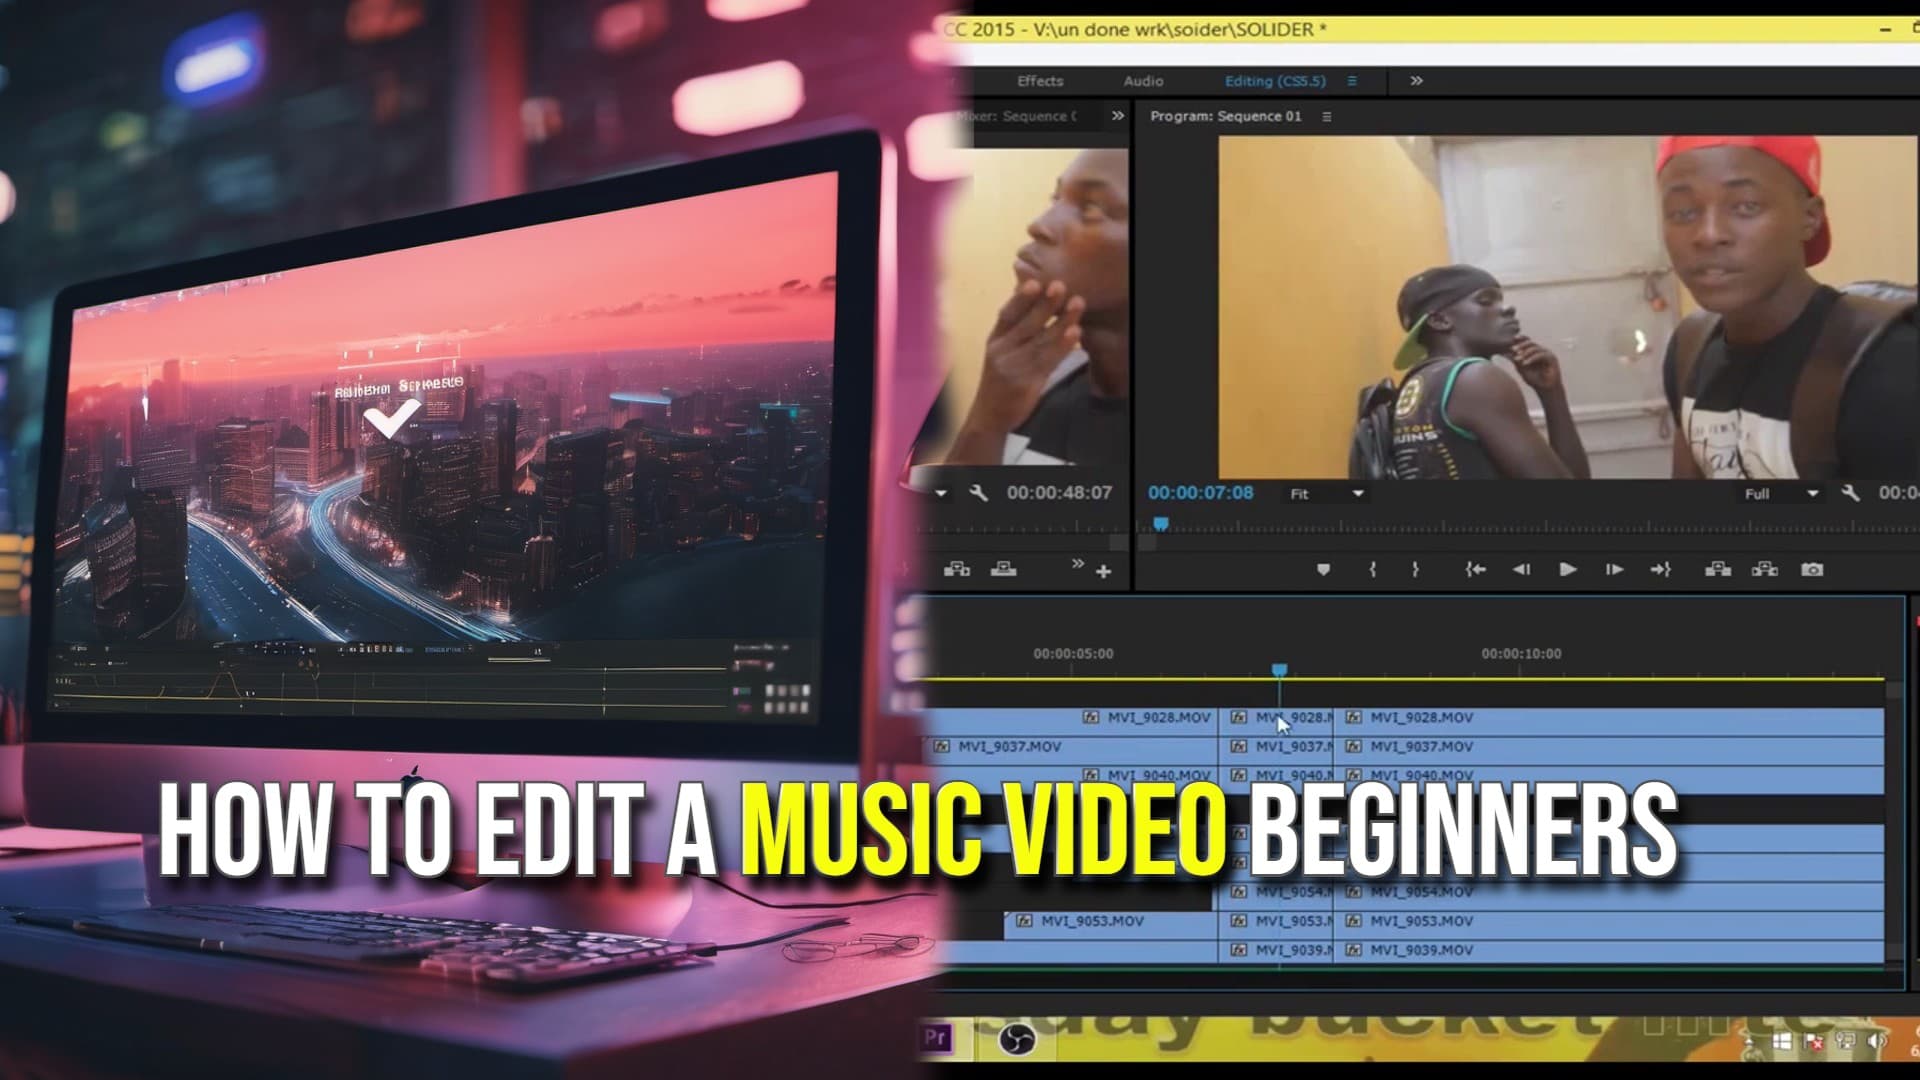 How to edit a music video beginners